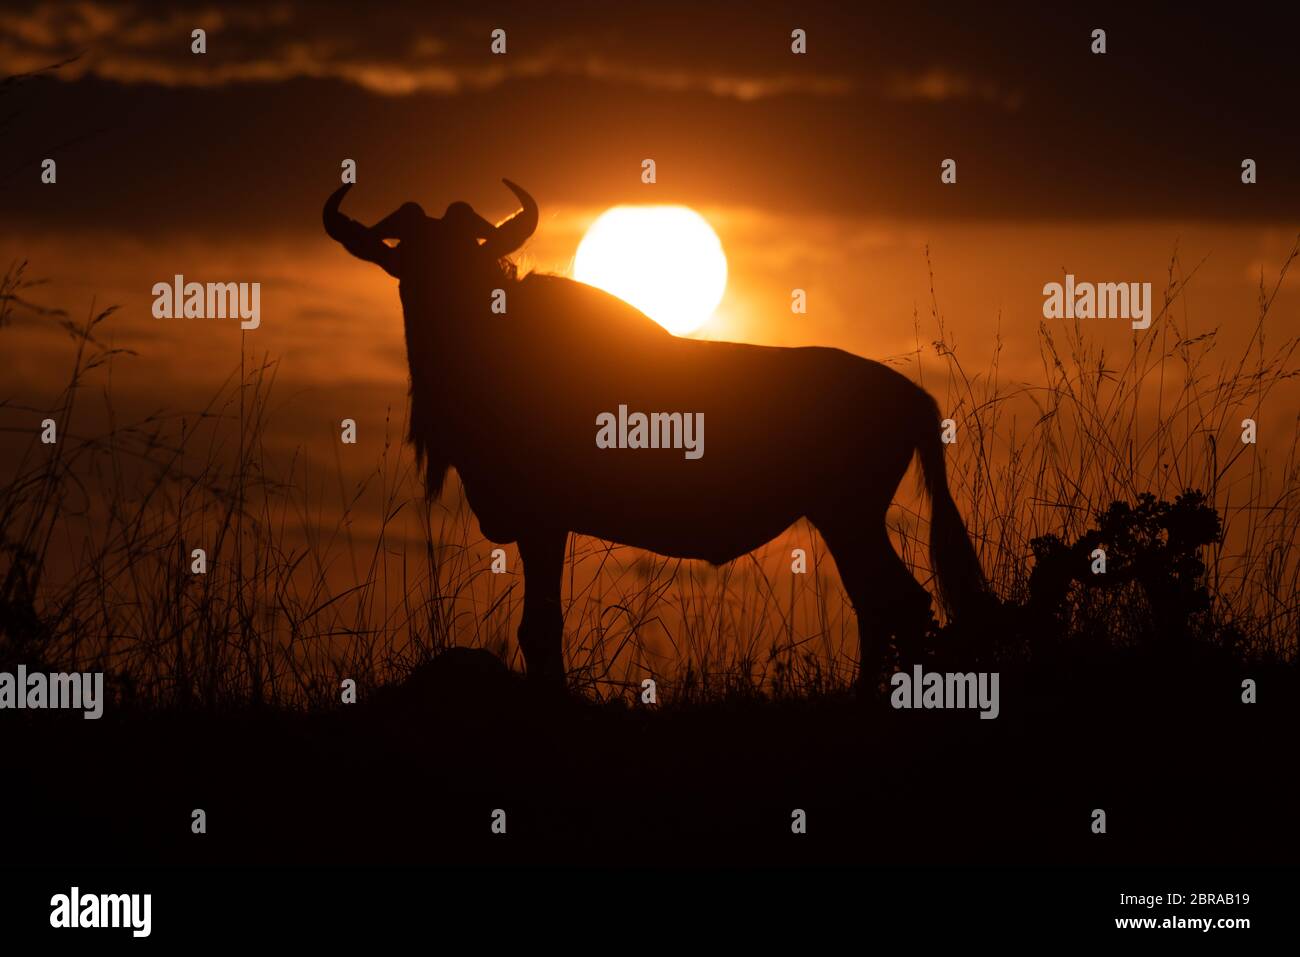 Blue wildebeest stands in silhouette at sunset Stock Photo